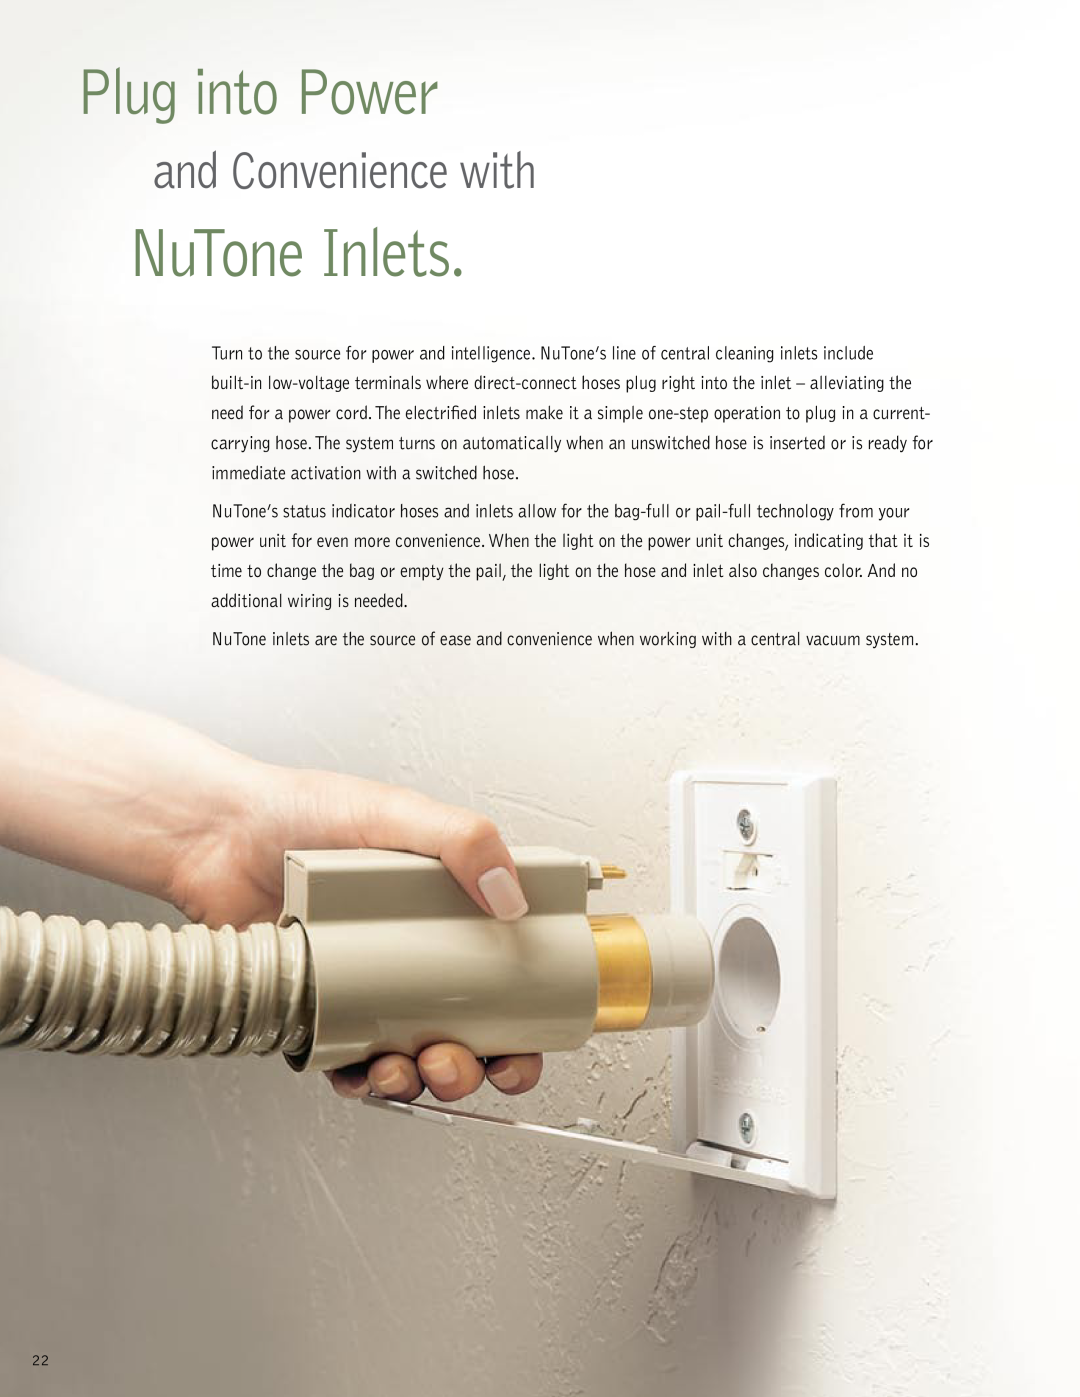 NuTone CH515, VX1000, VX550, CH620, CH615, CT350B manual NuTone Inlets, Plug into Power, and Convenience with 